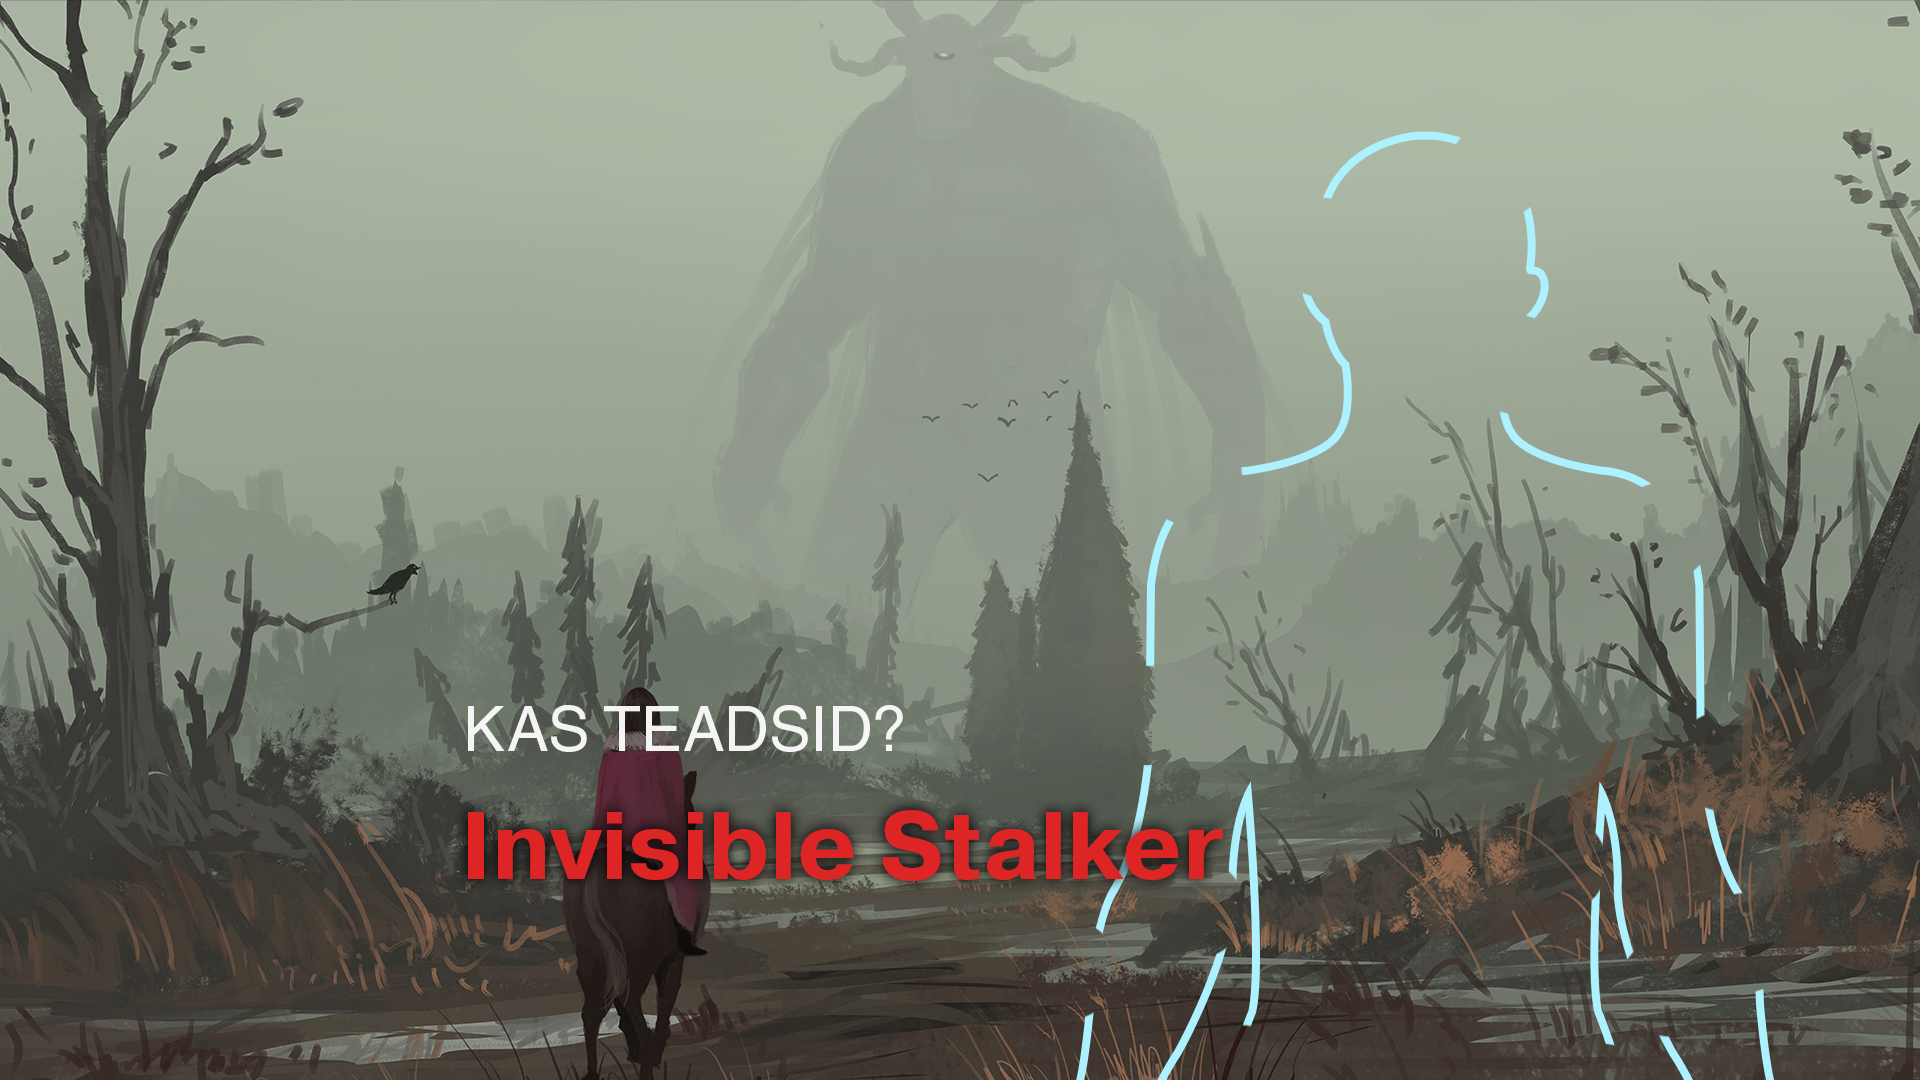 Video: Invisible Stalker